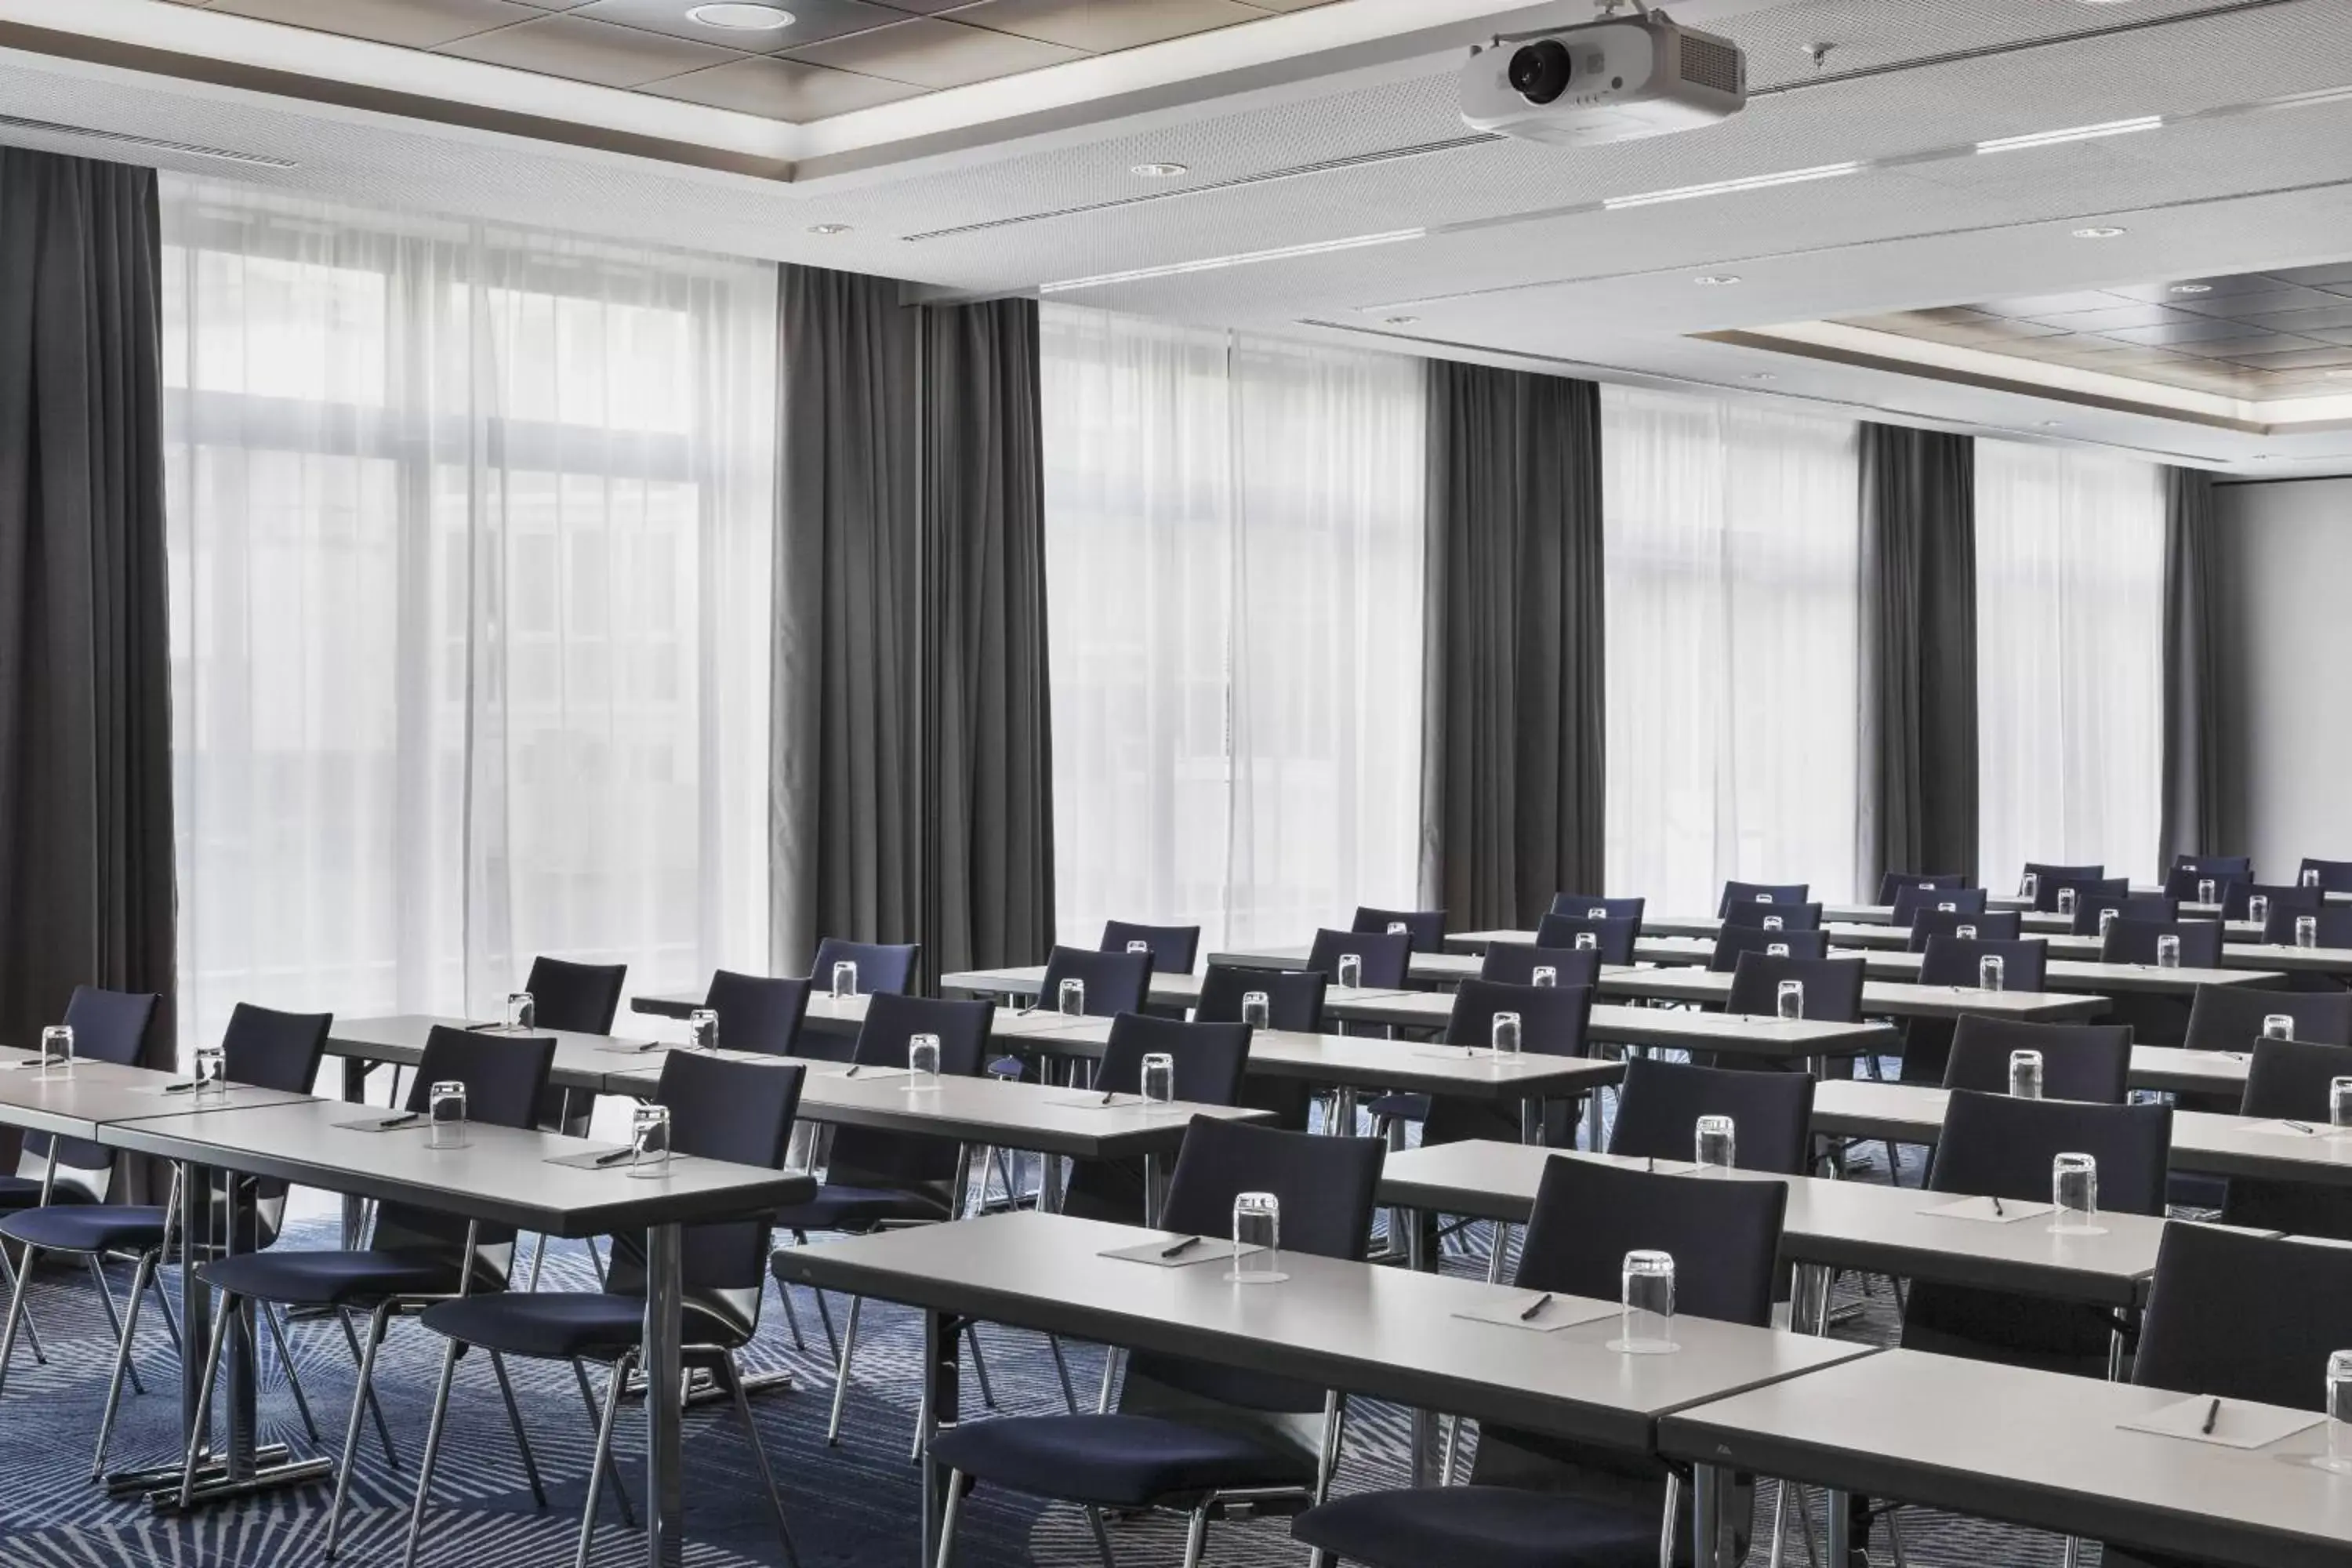 Meeting/conference room in Courtyard by Marriott Hamburg City